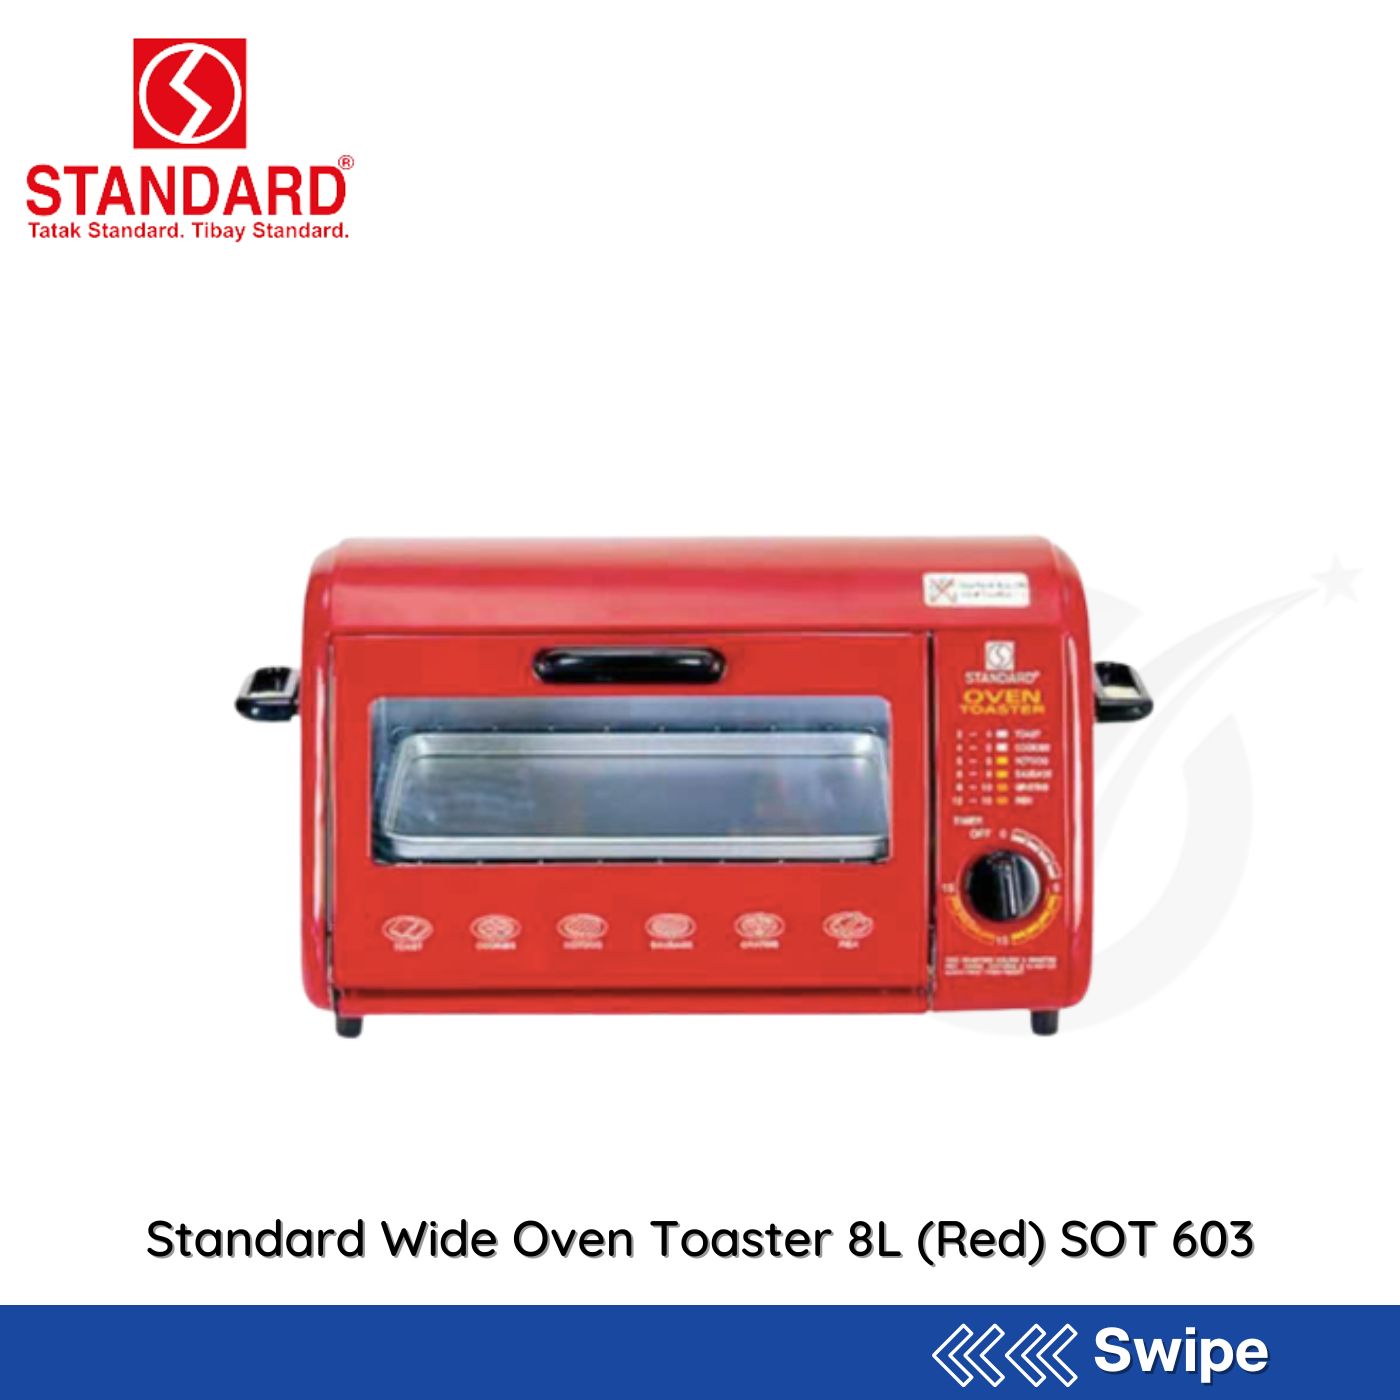 Standard Wide Oven Toaster 8L (Red) SOT 603